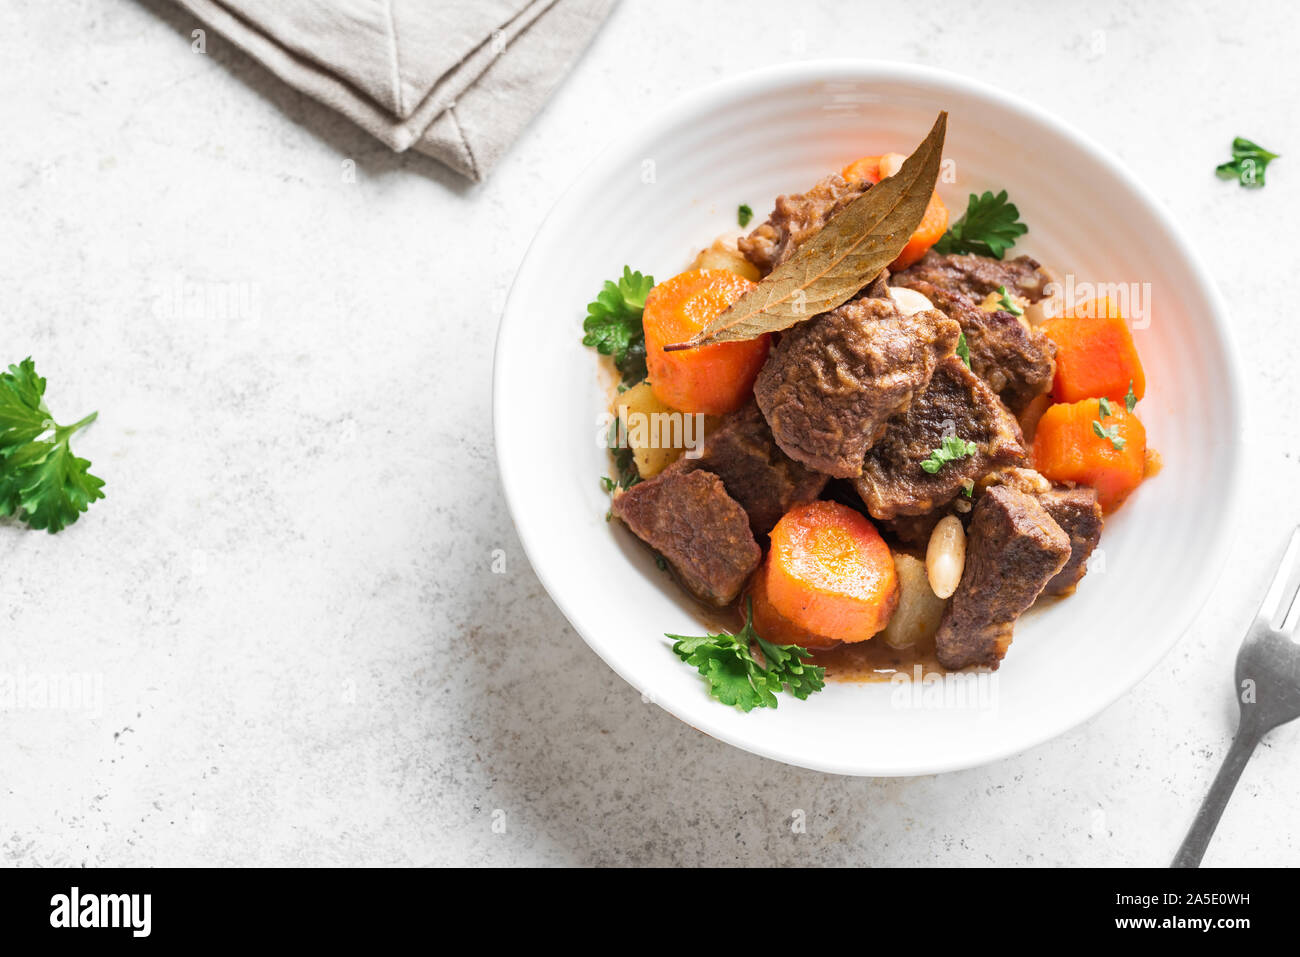 Beef meat stewed with potatoes, carrots and spices on white background, close up. Homemade winter comfort food - slow cooked meat stew. Stock Photo